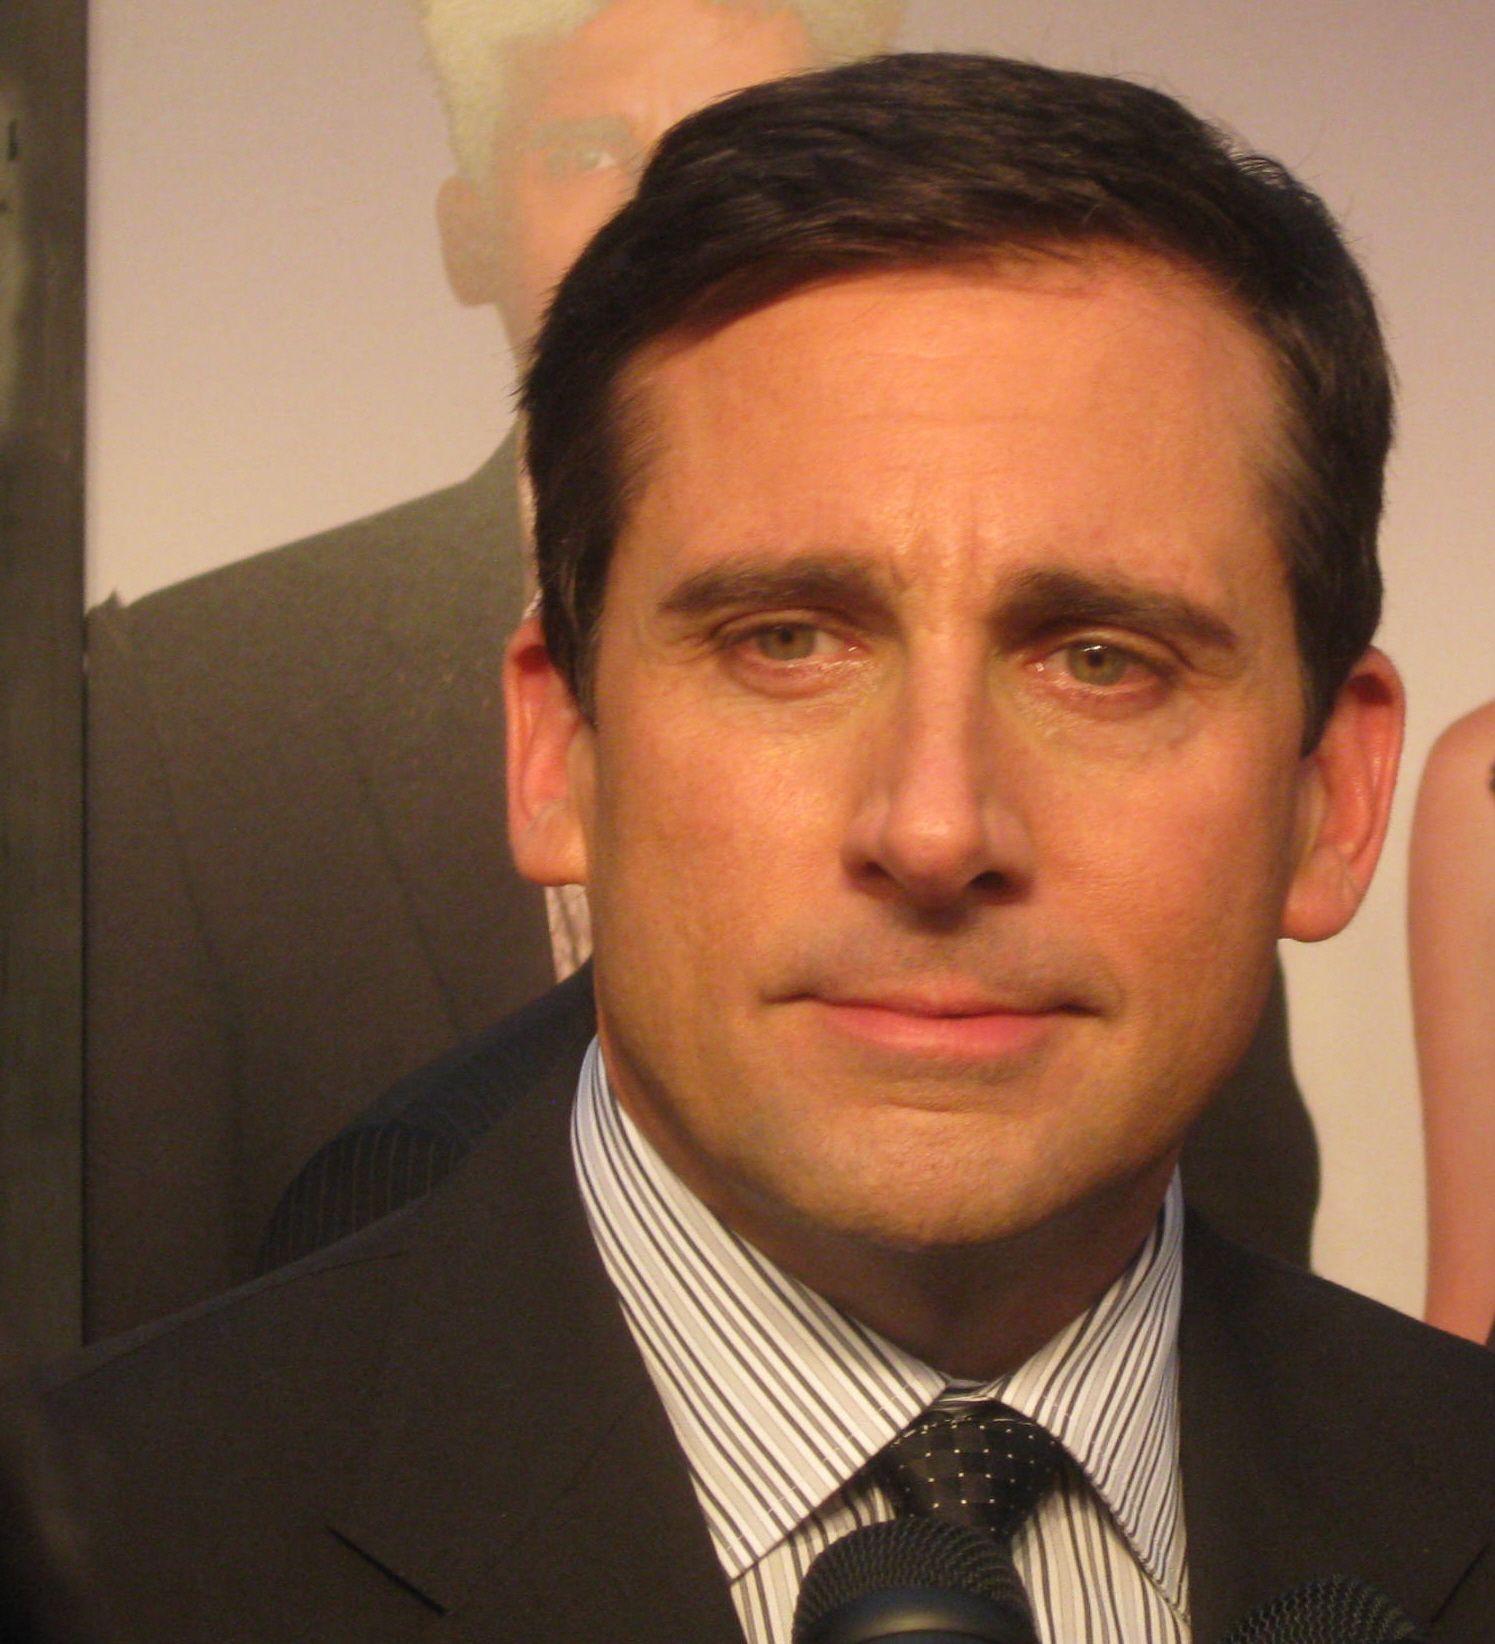 Pictures of Steve Carell, Picture.